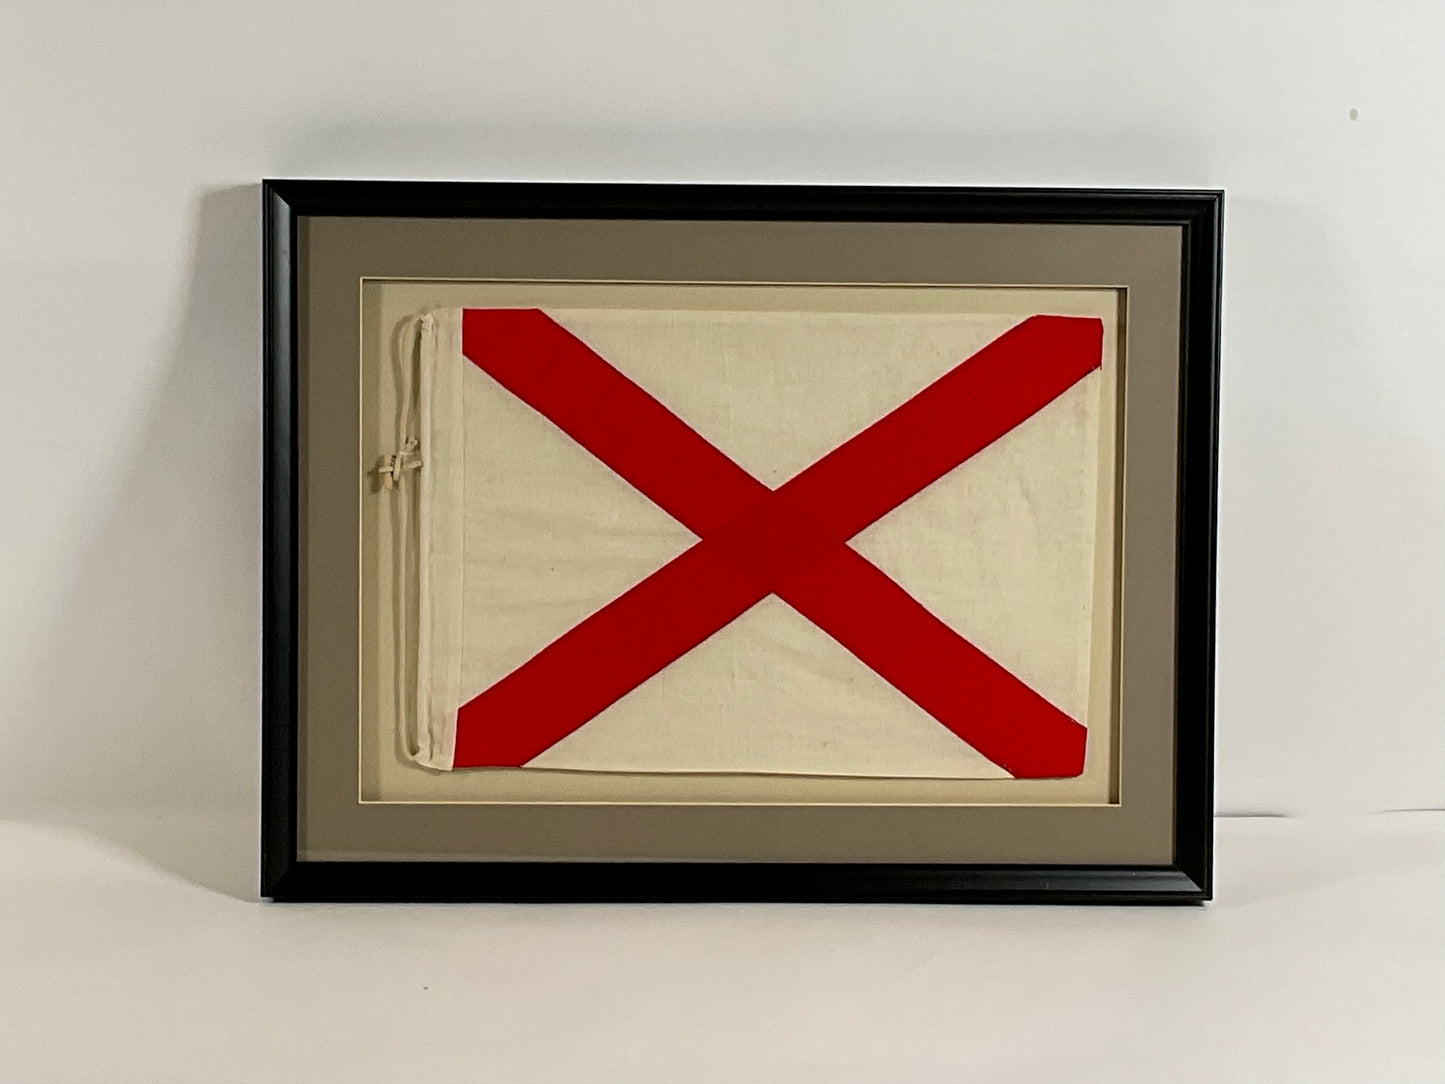 Nautical Signal Flag with Rope and Toggle